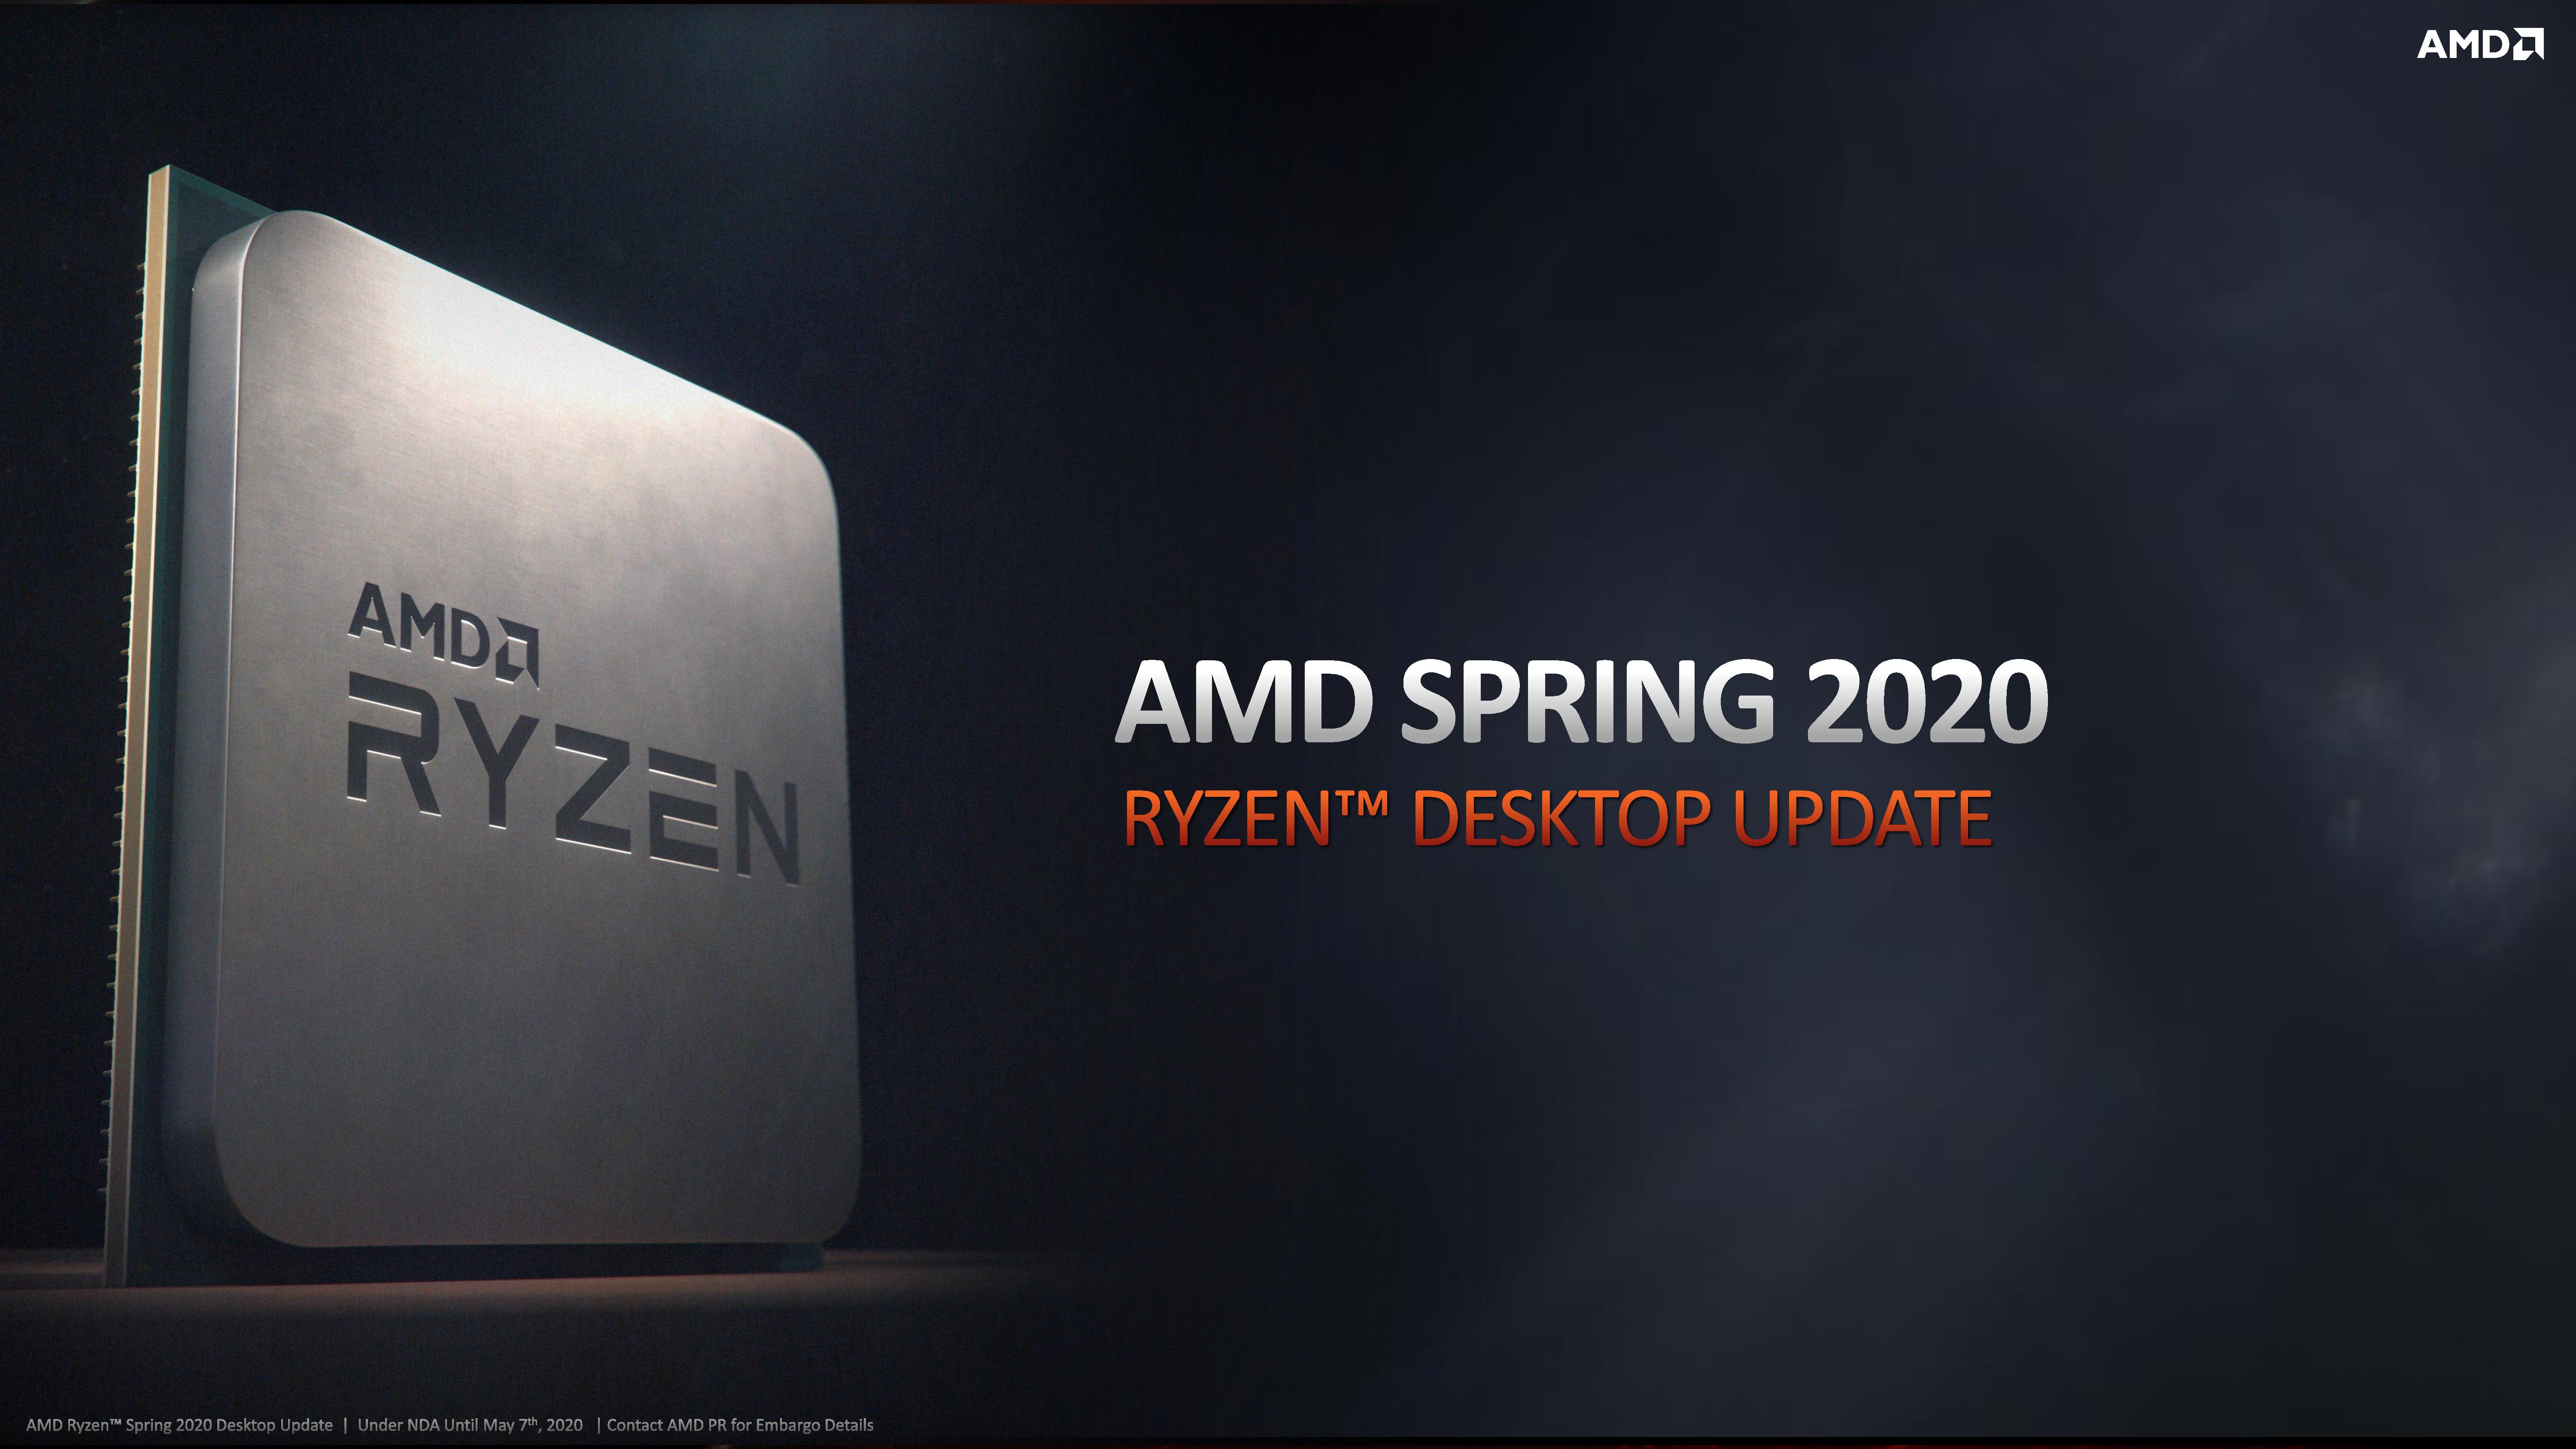 AMD Ryzen 3 3300X and 3100 Conclusion - The AMD Ryzen 3 3300X and 